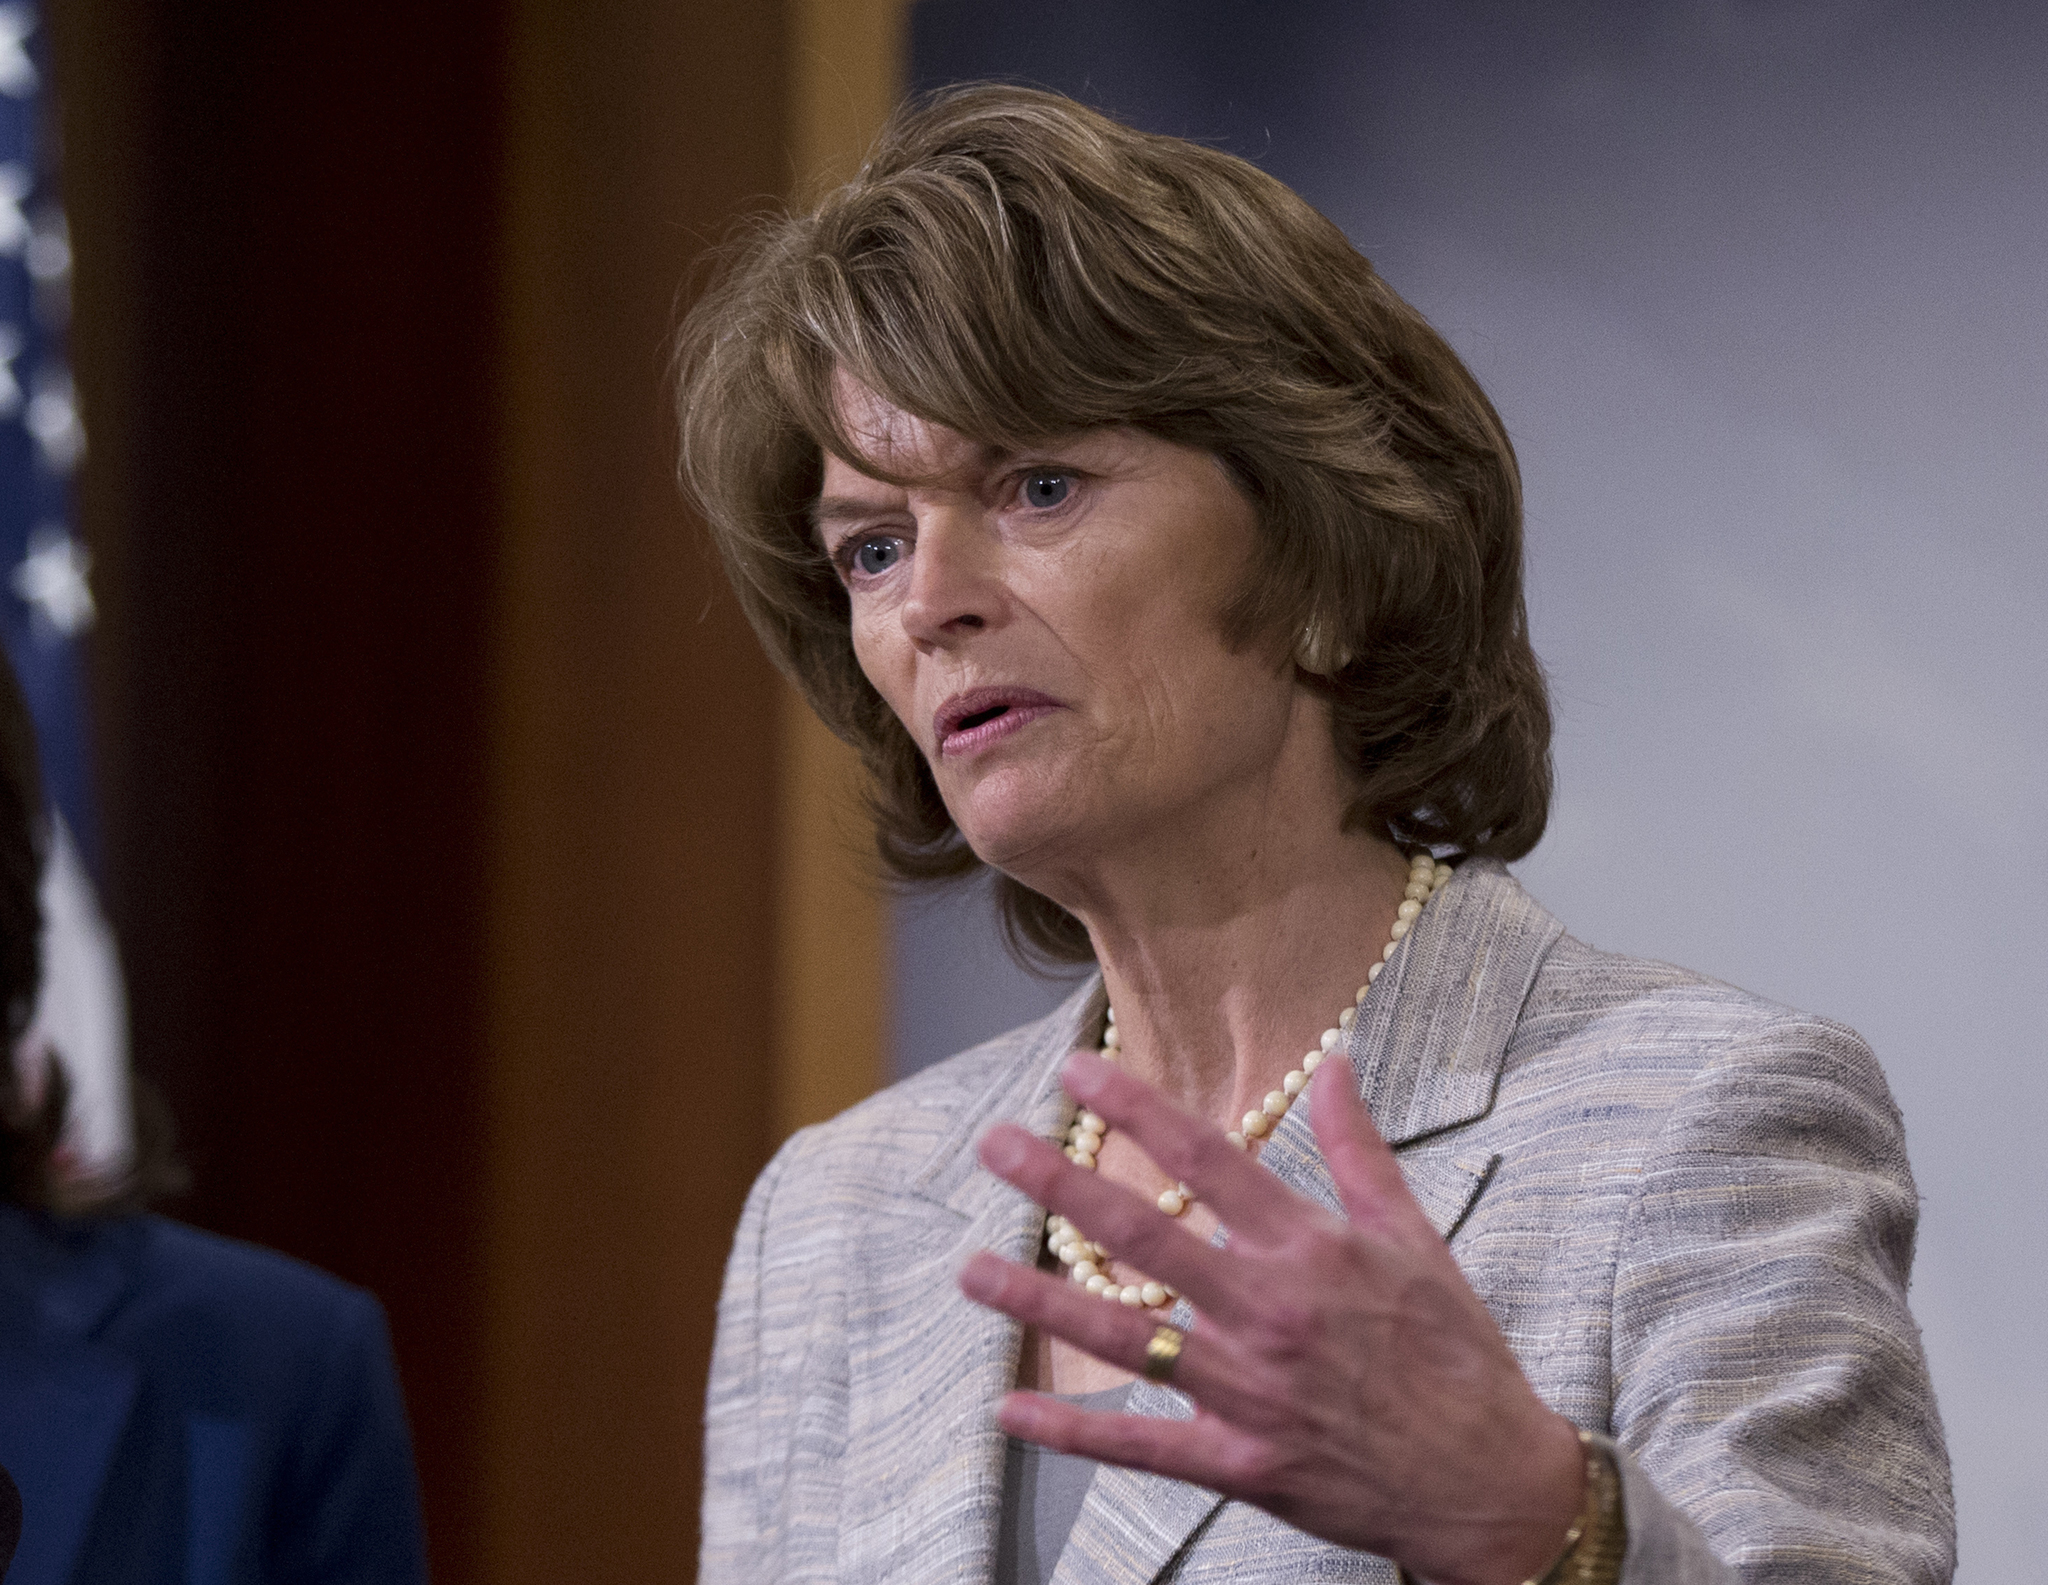 In this April 20, 2016 file photo, Sen. Lisa Murkowski, R-Alaska speaks during a news conference on Capitol Hill in Washington. Betsy DeVos bid to become education secretary could be in trouble. Two Republican senators, Susan Collins of Maine and Lisa Murkowski of Alaska, announced their opposition to DeVos in speeches on the Senate floor Wednesday. (AP Photo/Manuel Balce Ceneta, File)